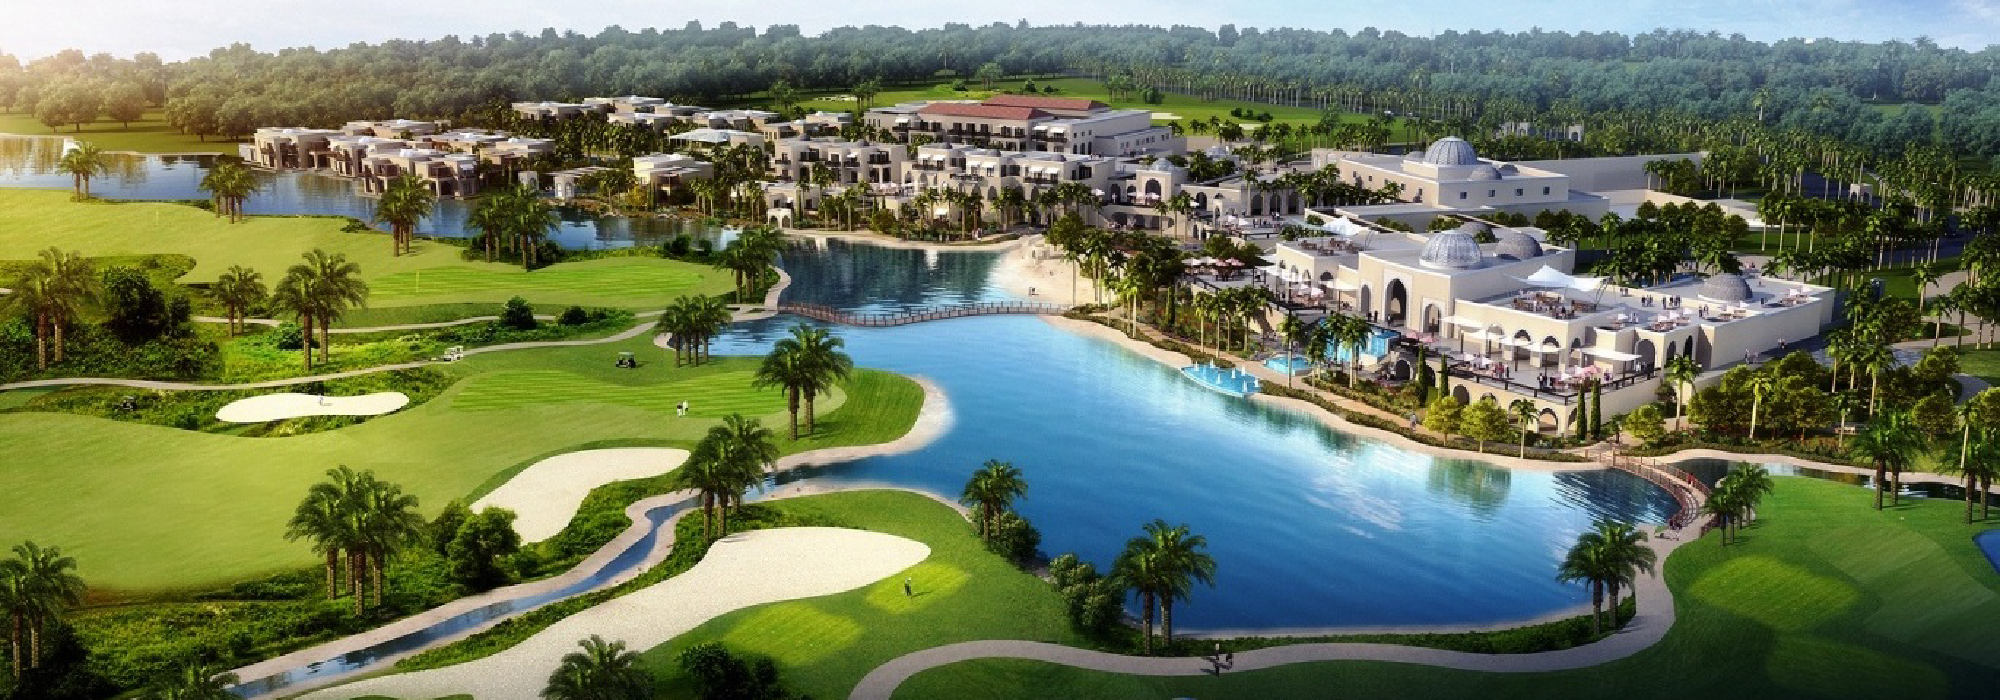 DUBAI – LUXURY LIVES HERE!<br>BUY A HOME. GET A CAR FREE.<br>Live in luxury, drive in style!